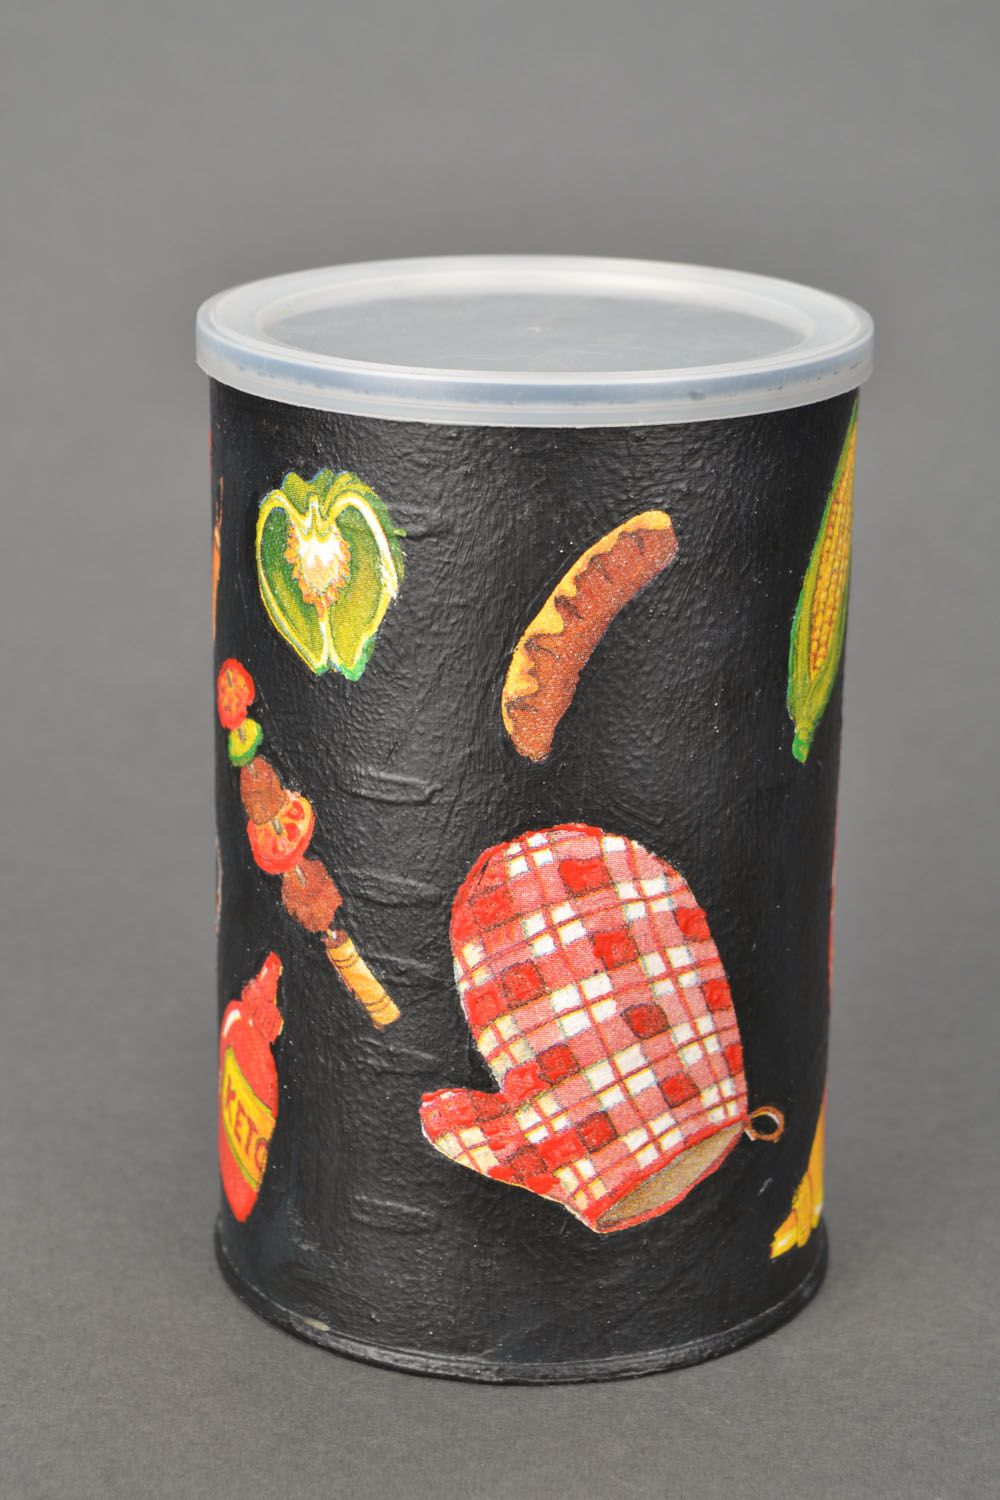 15 oz handmade decorative jar with a lid and grill design 0,15 lb photo 3